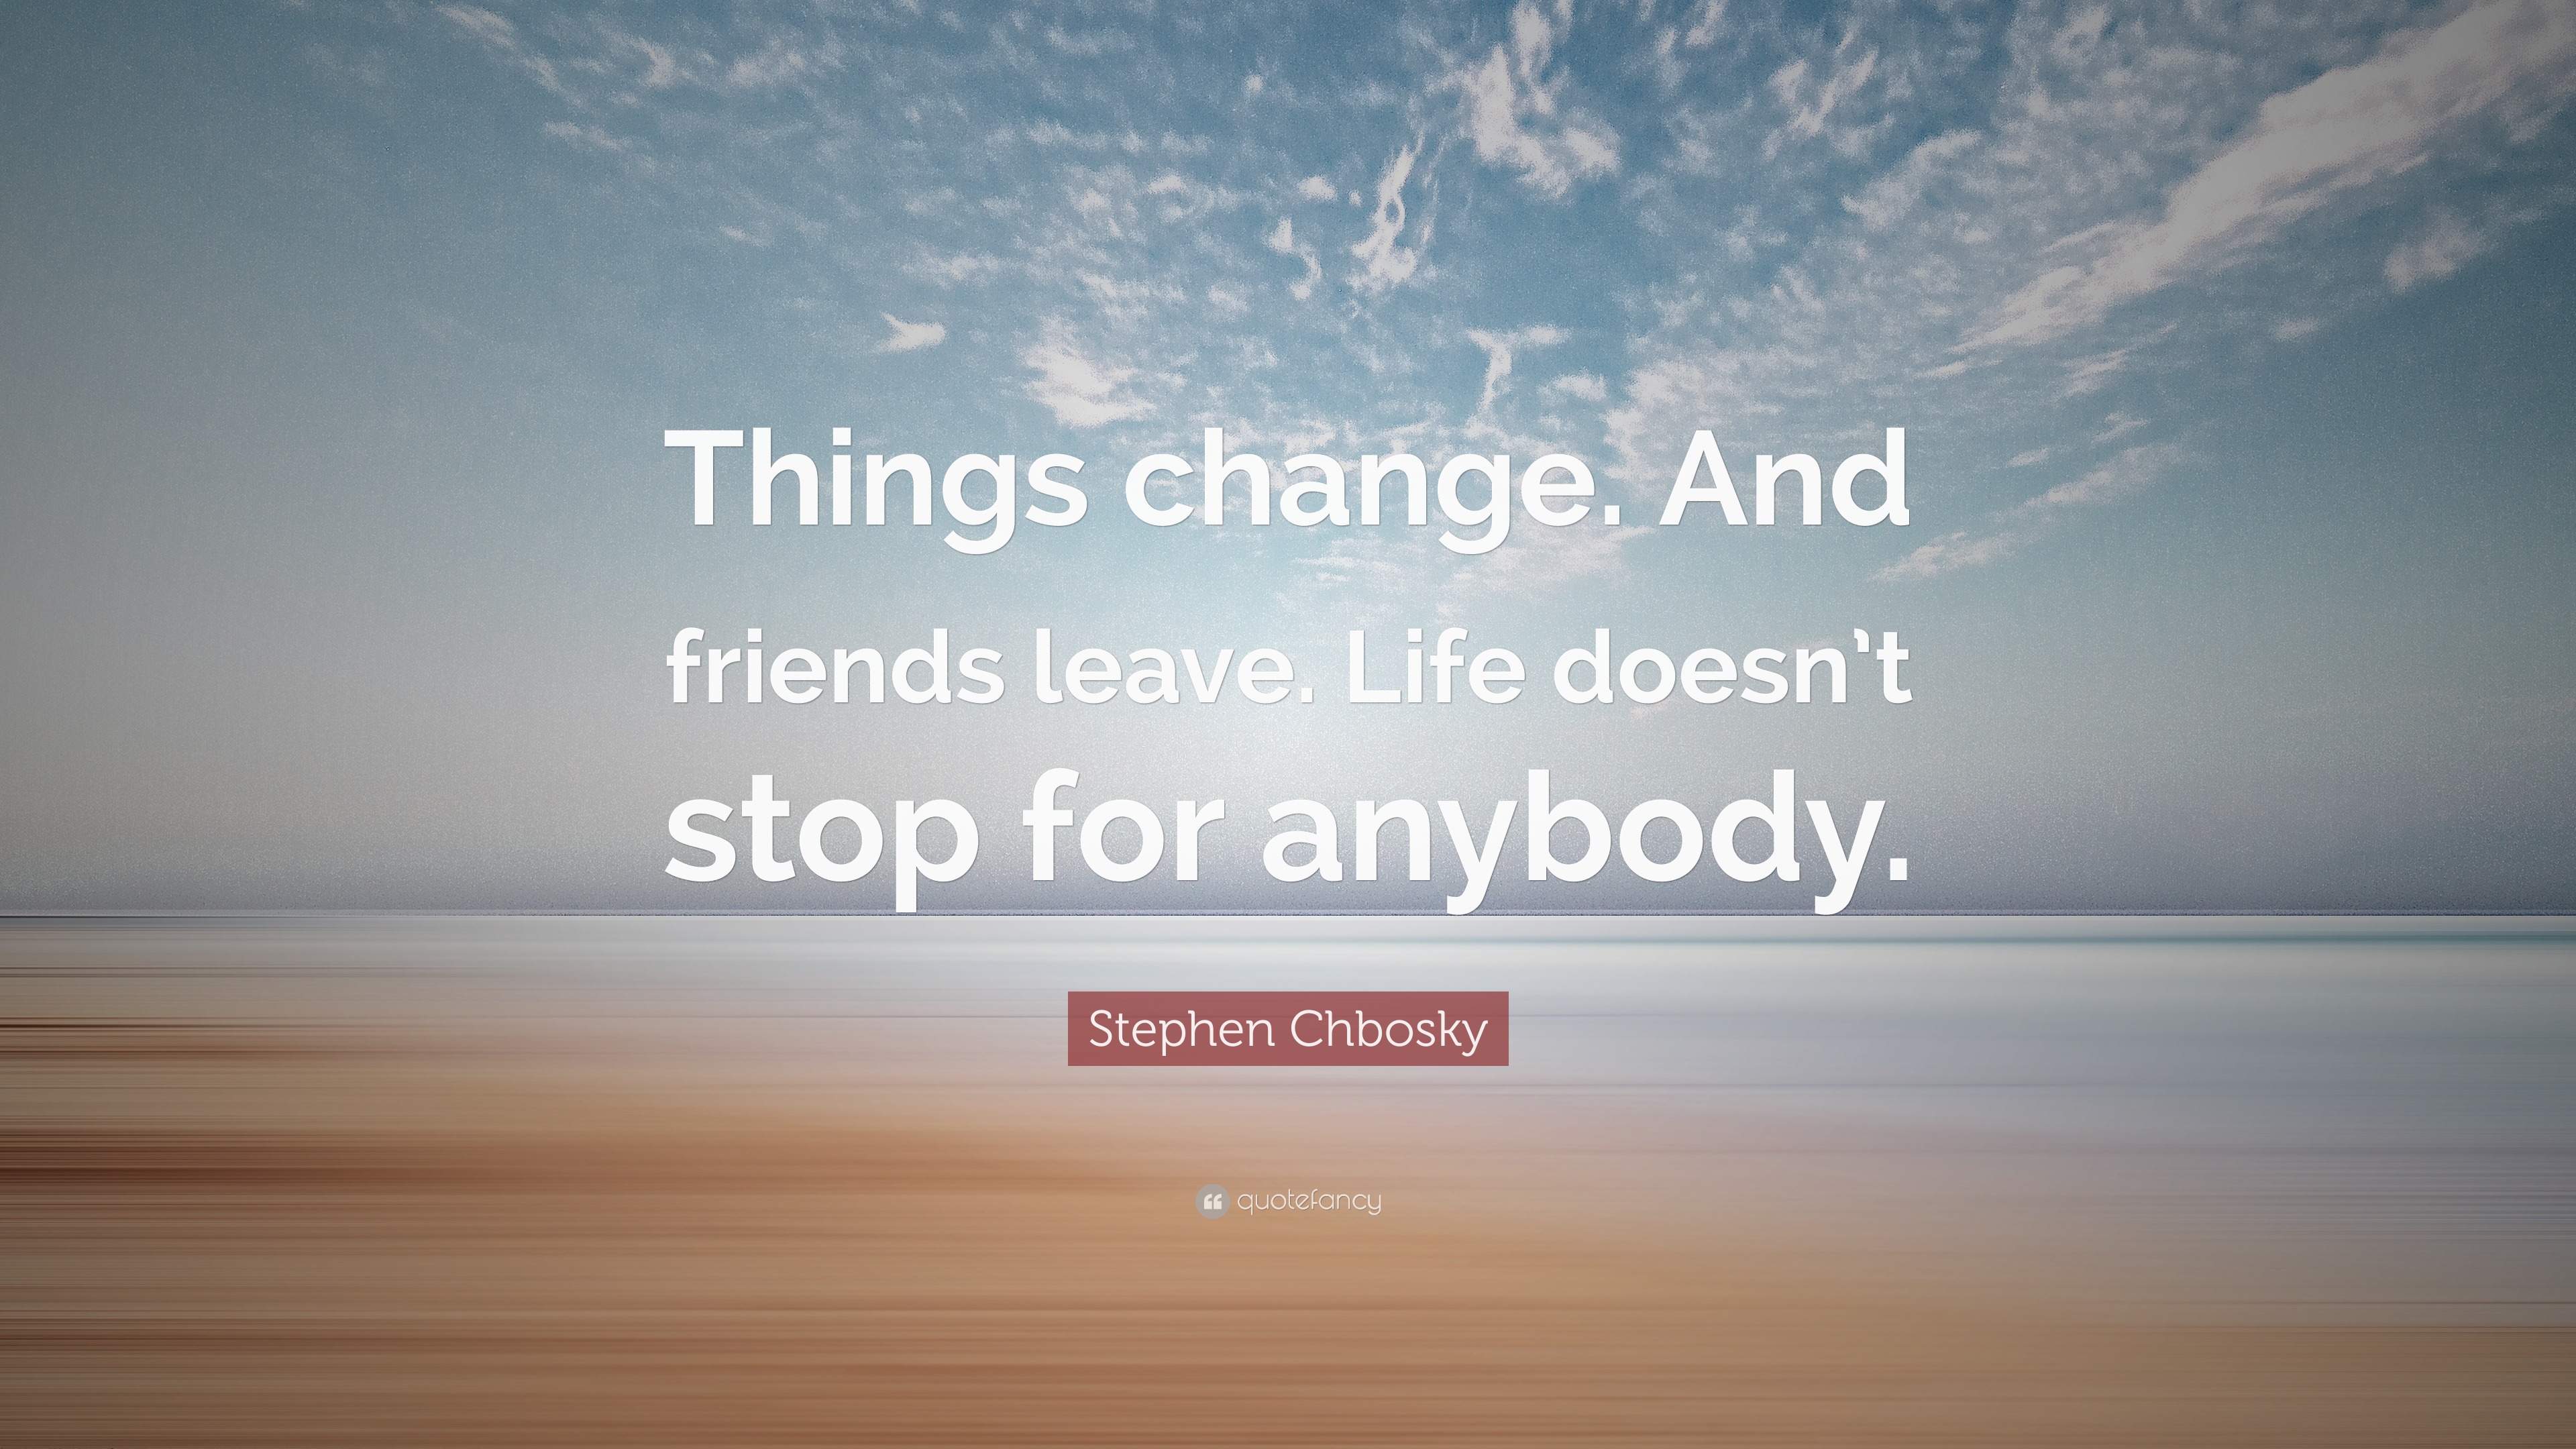 Stephen Chbosky Quote “Things change And friends leave Life doesn t